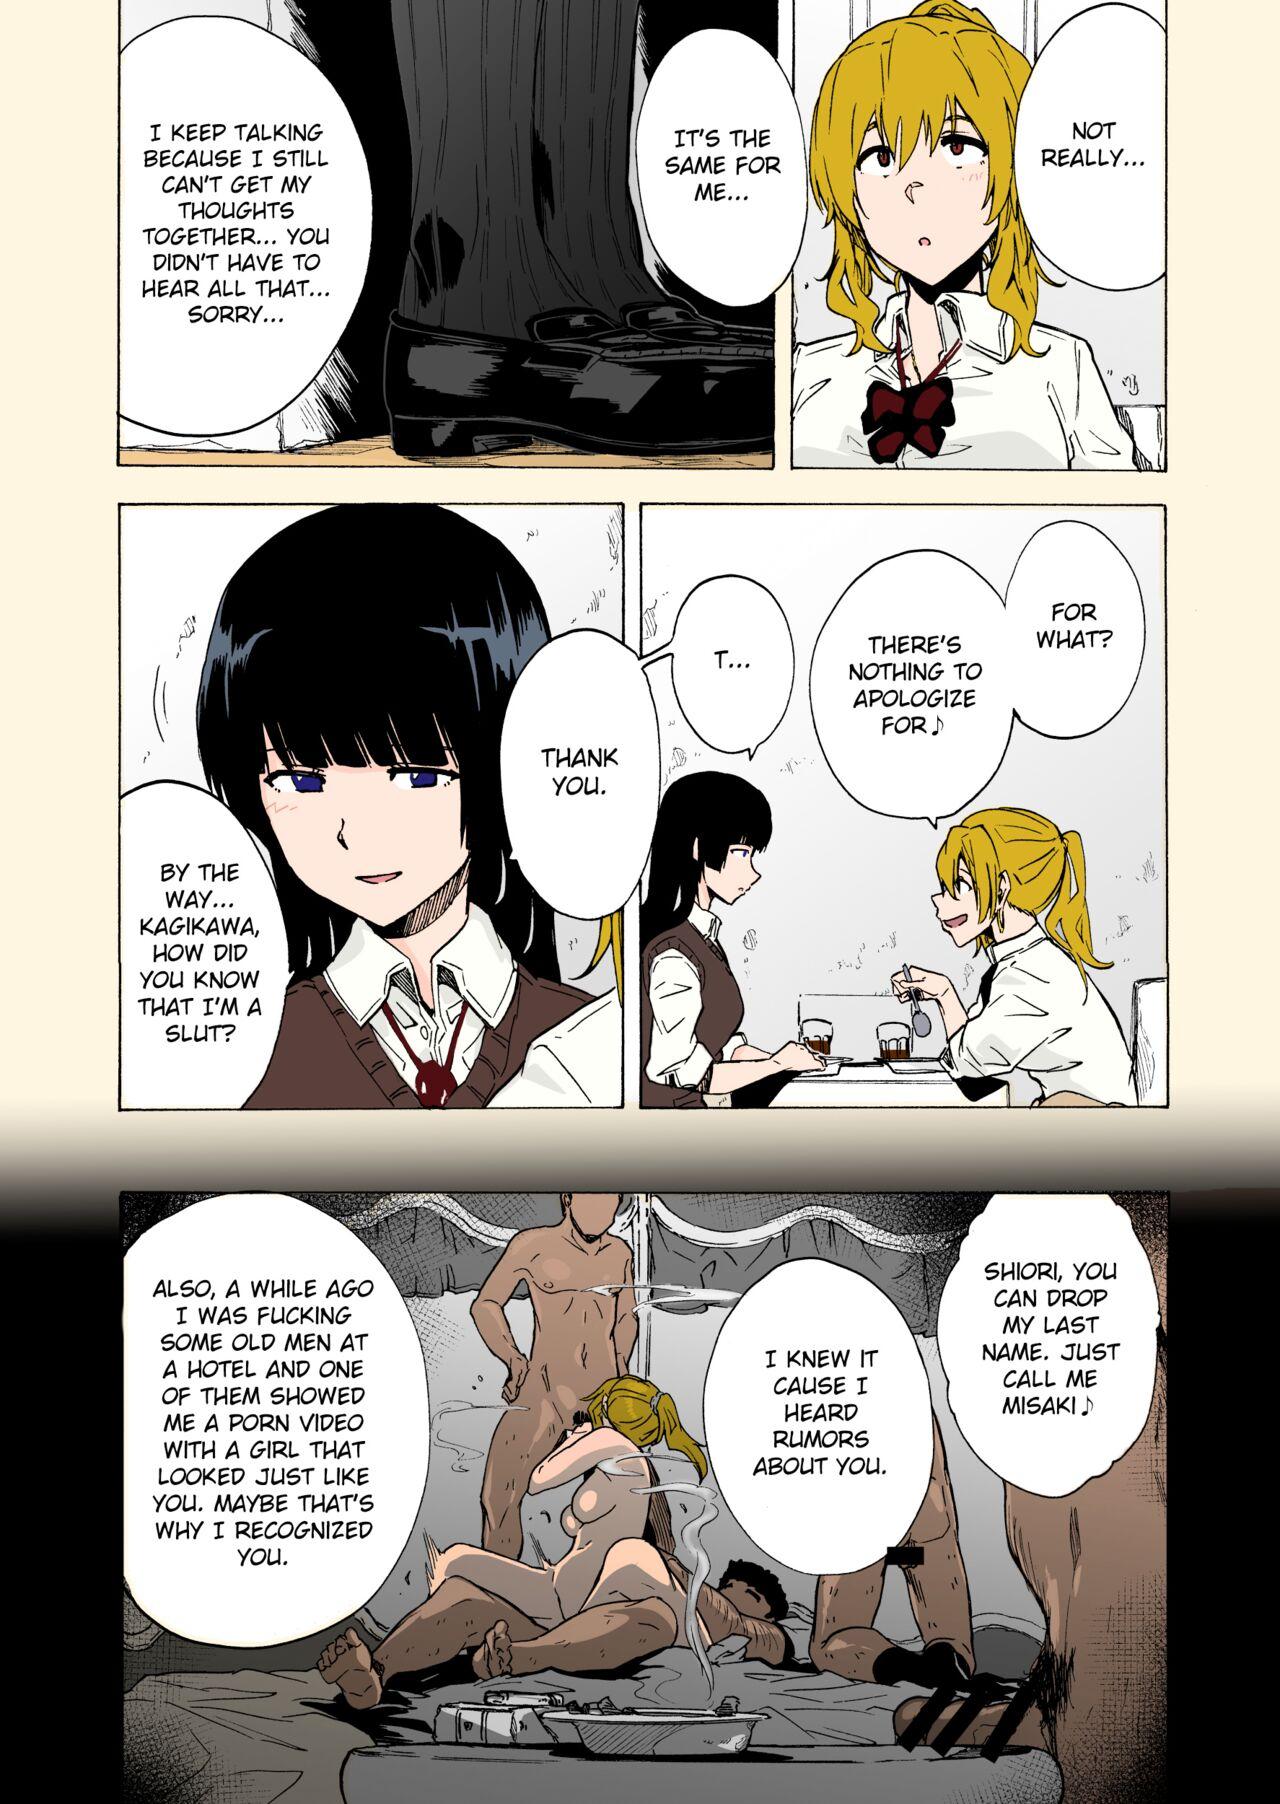 Negao GAME OF BITCHES 2 - Original Hugecock - Page 10